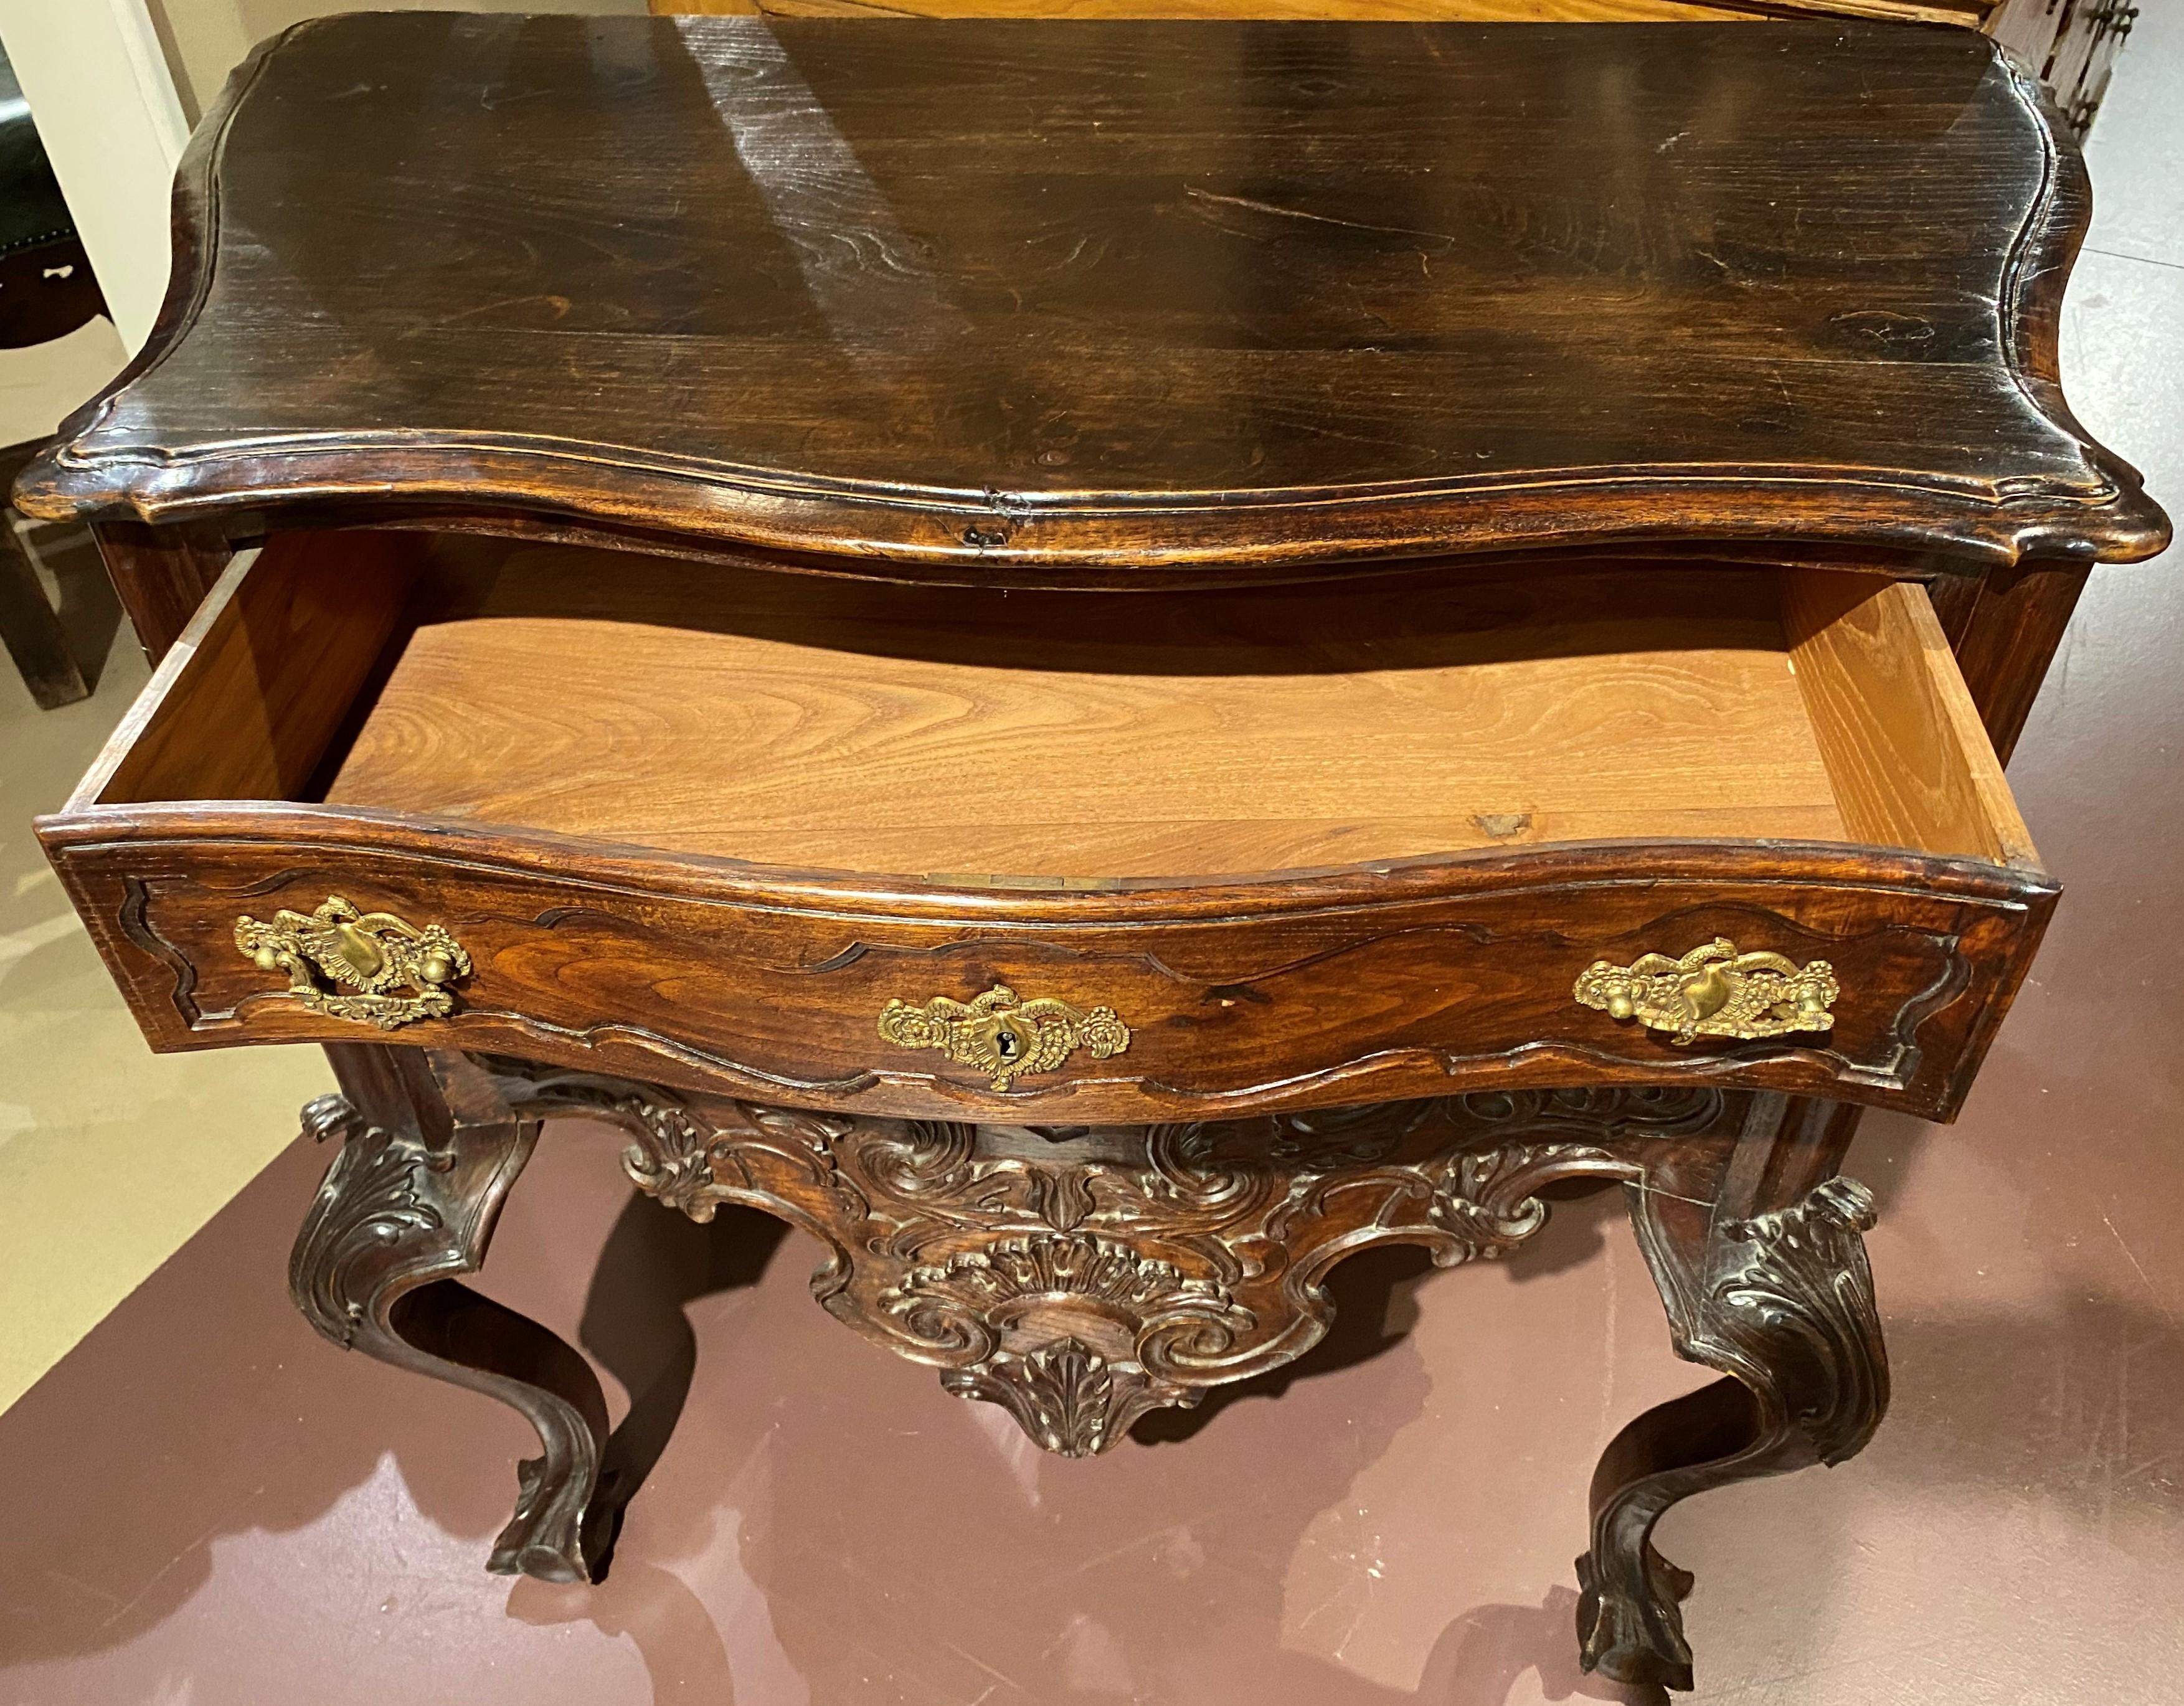 Wood 19th Century Portuguese Ornately Carved Rococo Revival Lowboy For Sale